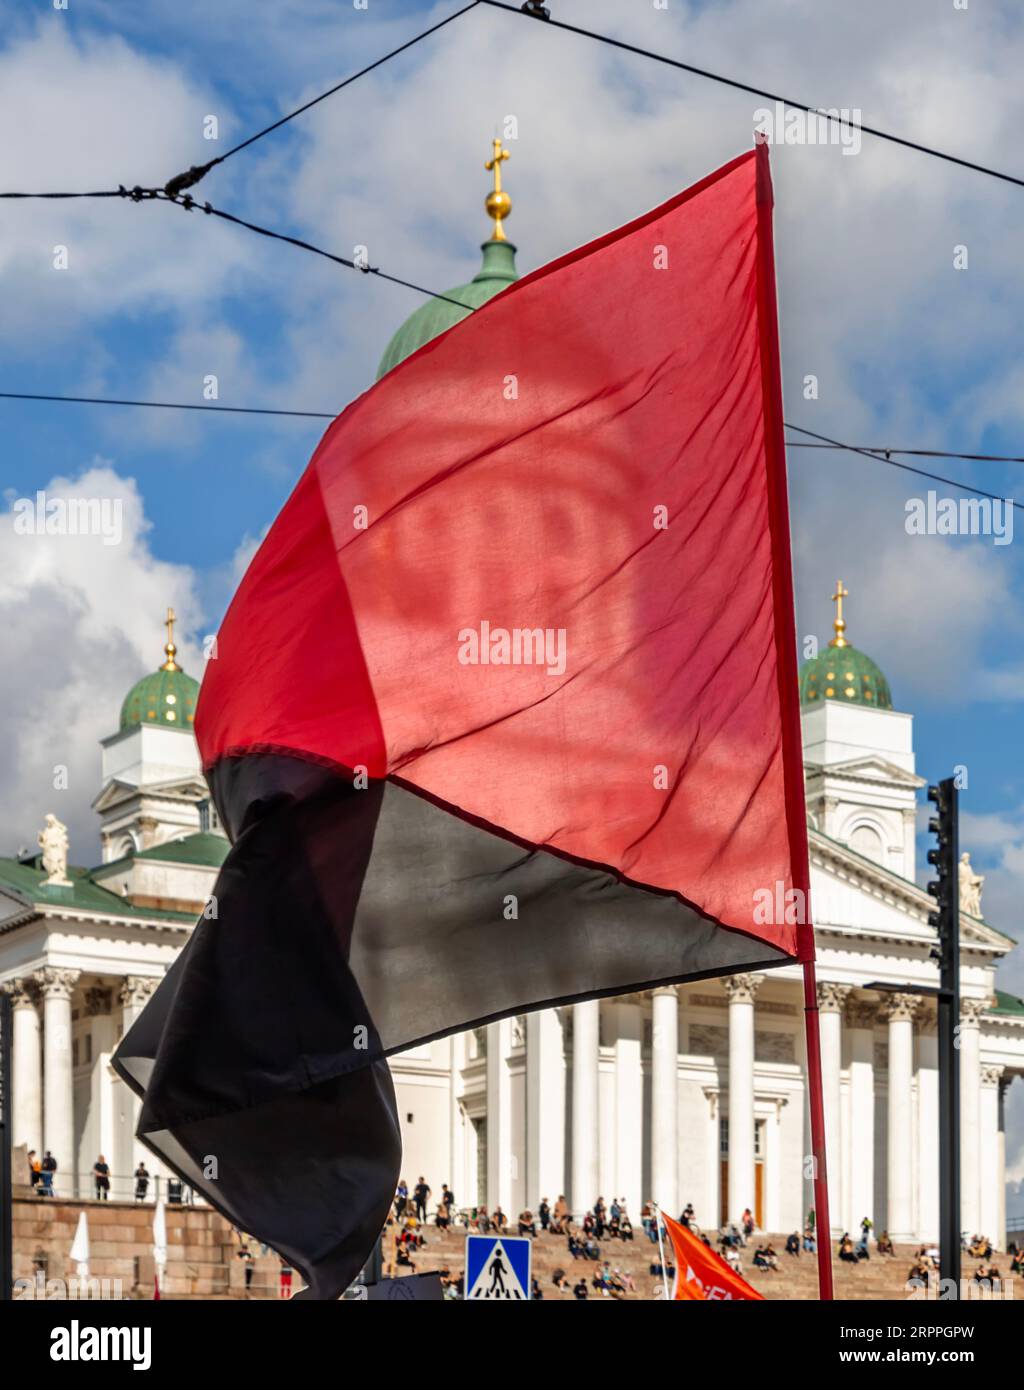 Red and black flag flown in front of the Helsinki Cathedral during the ’End the silence!’ demonstration against racism and fascism. Stock Photo